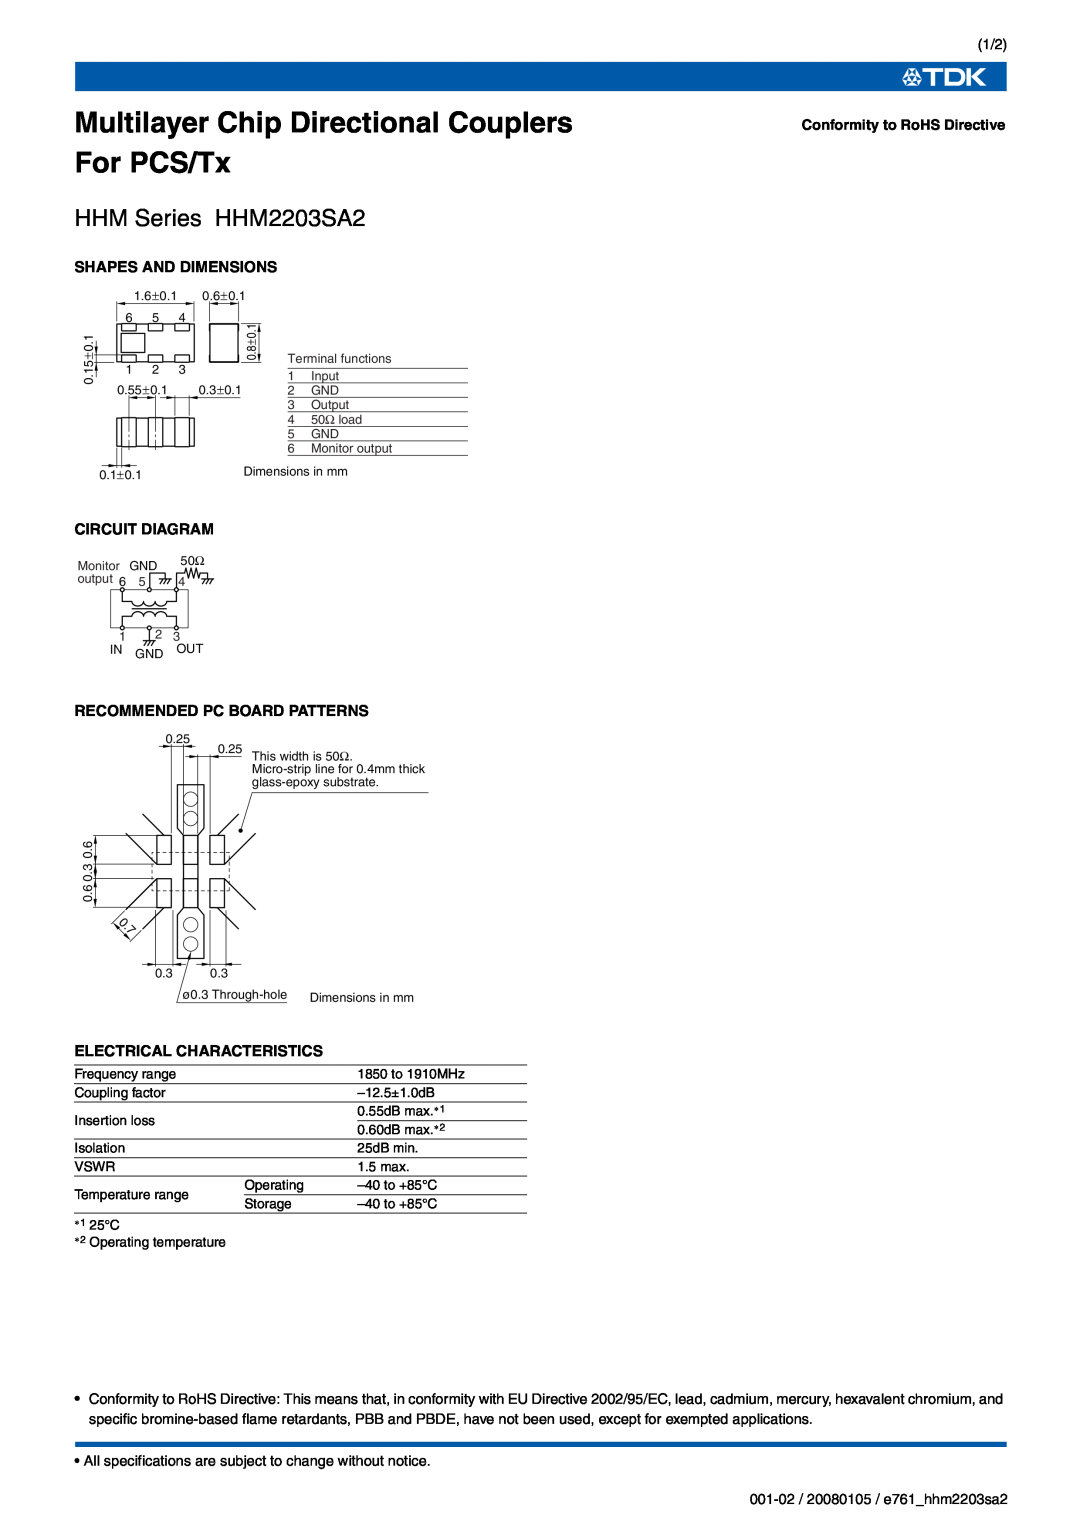 TDK specifications Shapes And Dimensions, Conformity to RoHS Directive, Circuit Diagram, HHM Series HHM2203SA2 